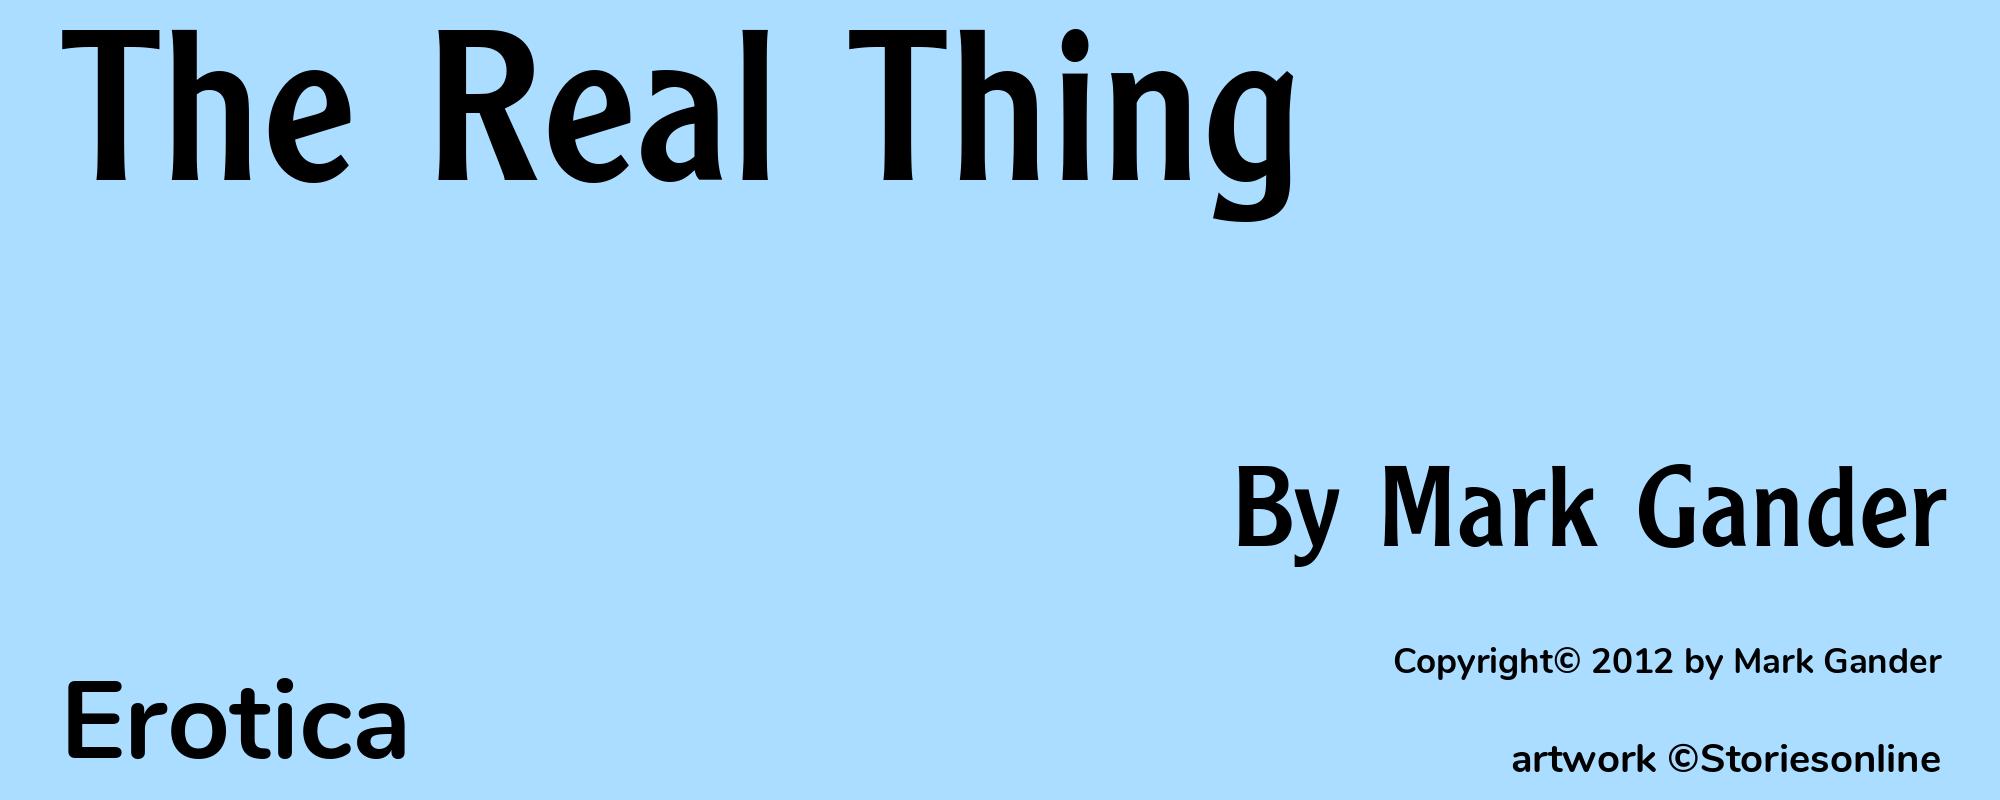 The Real Thing - Cover